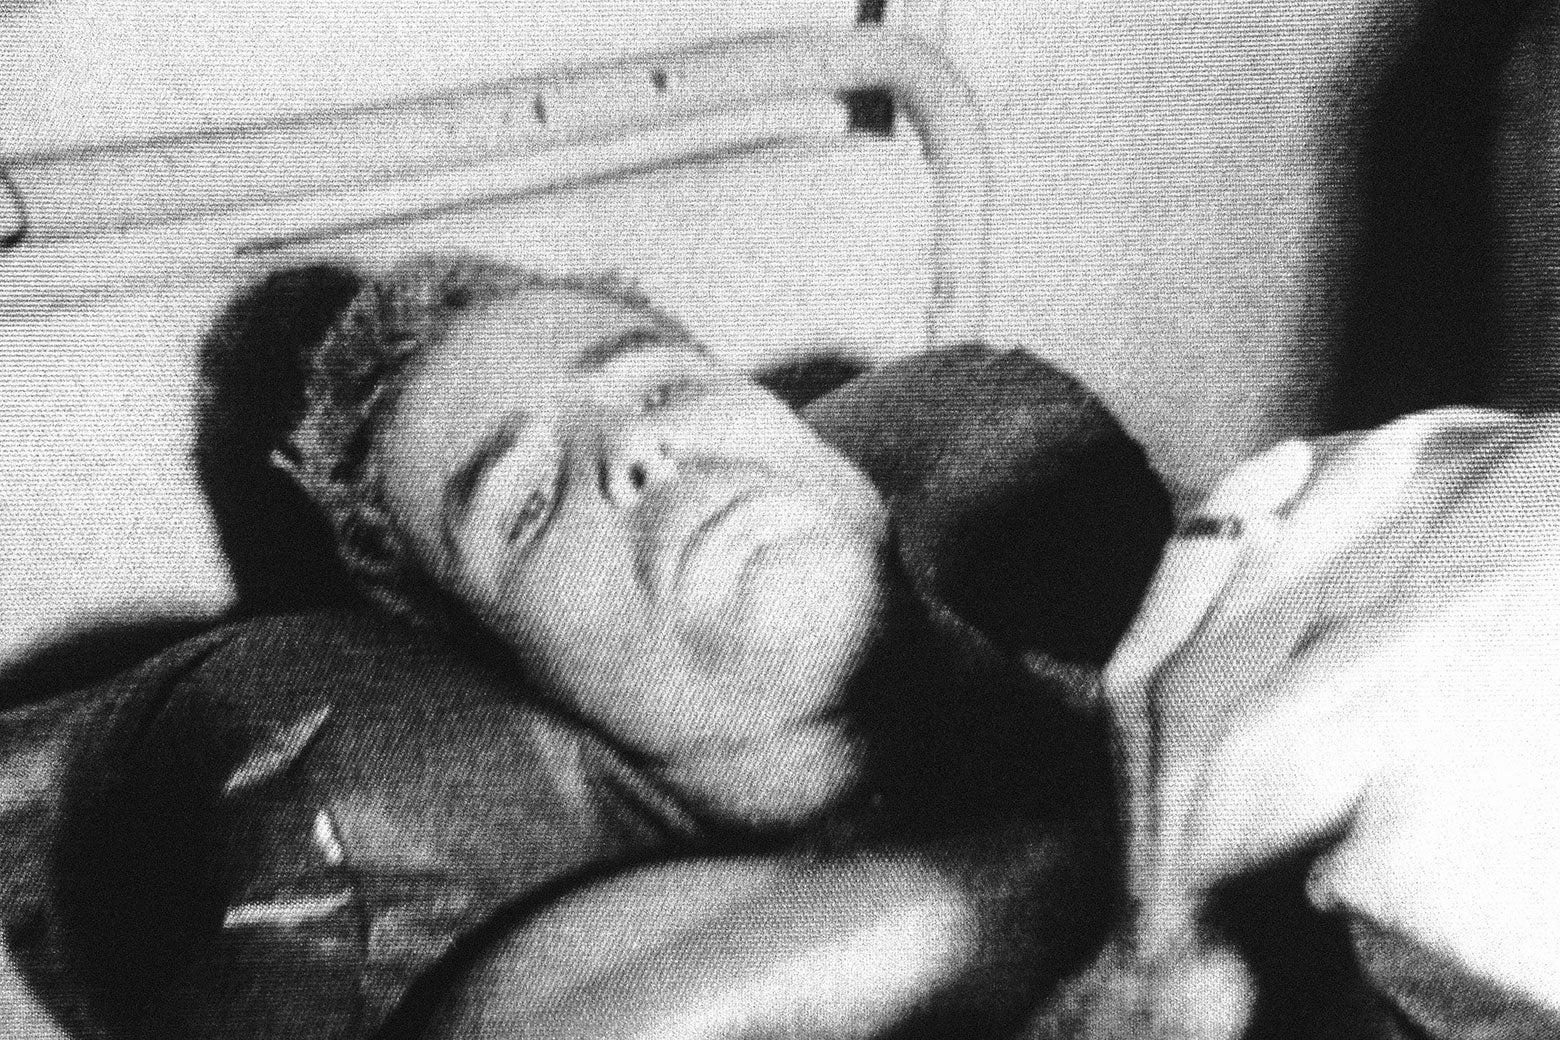 Grainy black and white photo of young McCain on a hospital bed